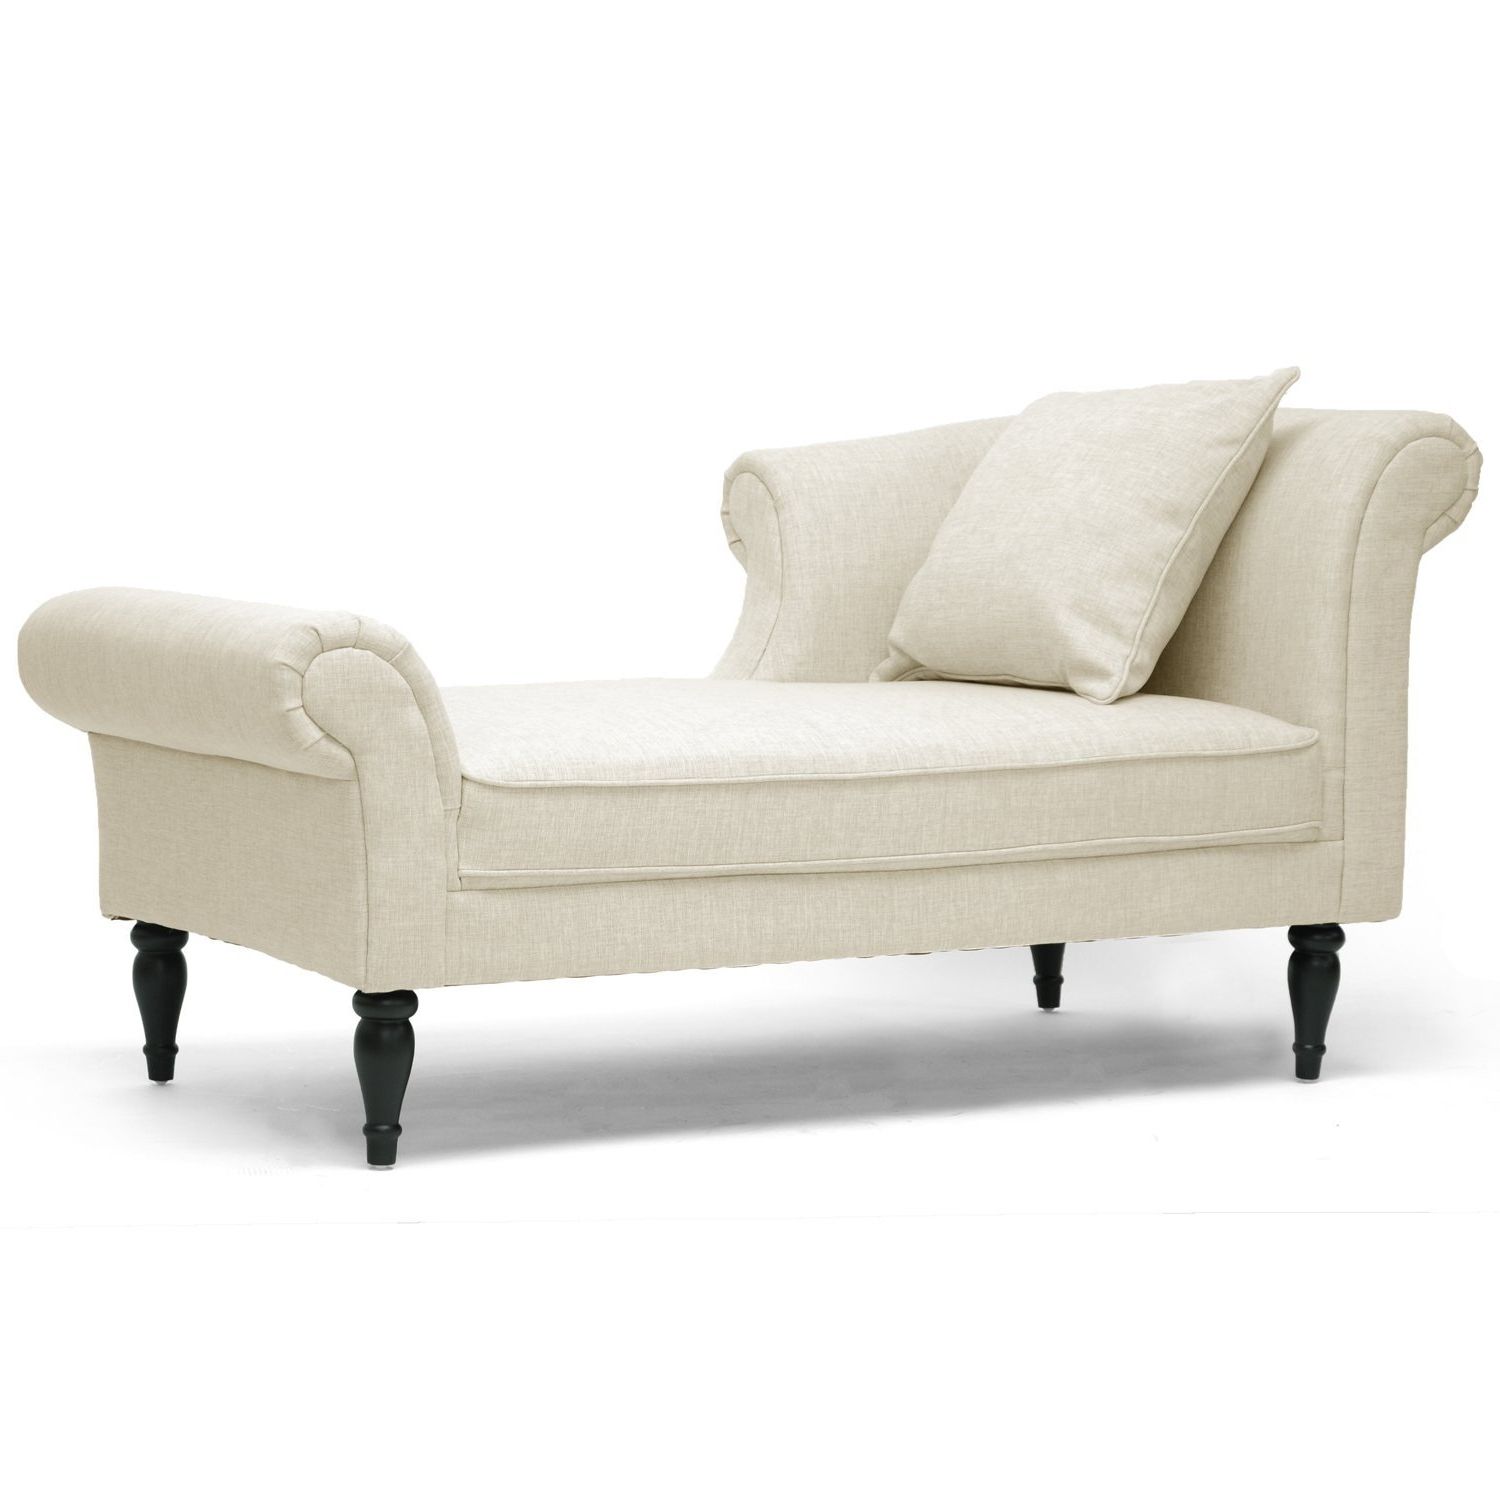 Well Known Fresh Chaise Lounge Sofa Bed #17213 Regarding Chaise Lounge Sofa Beds (View 7 of 15)